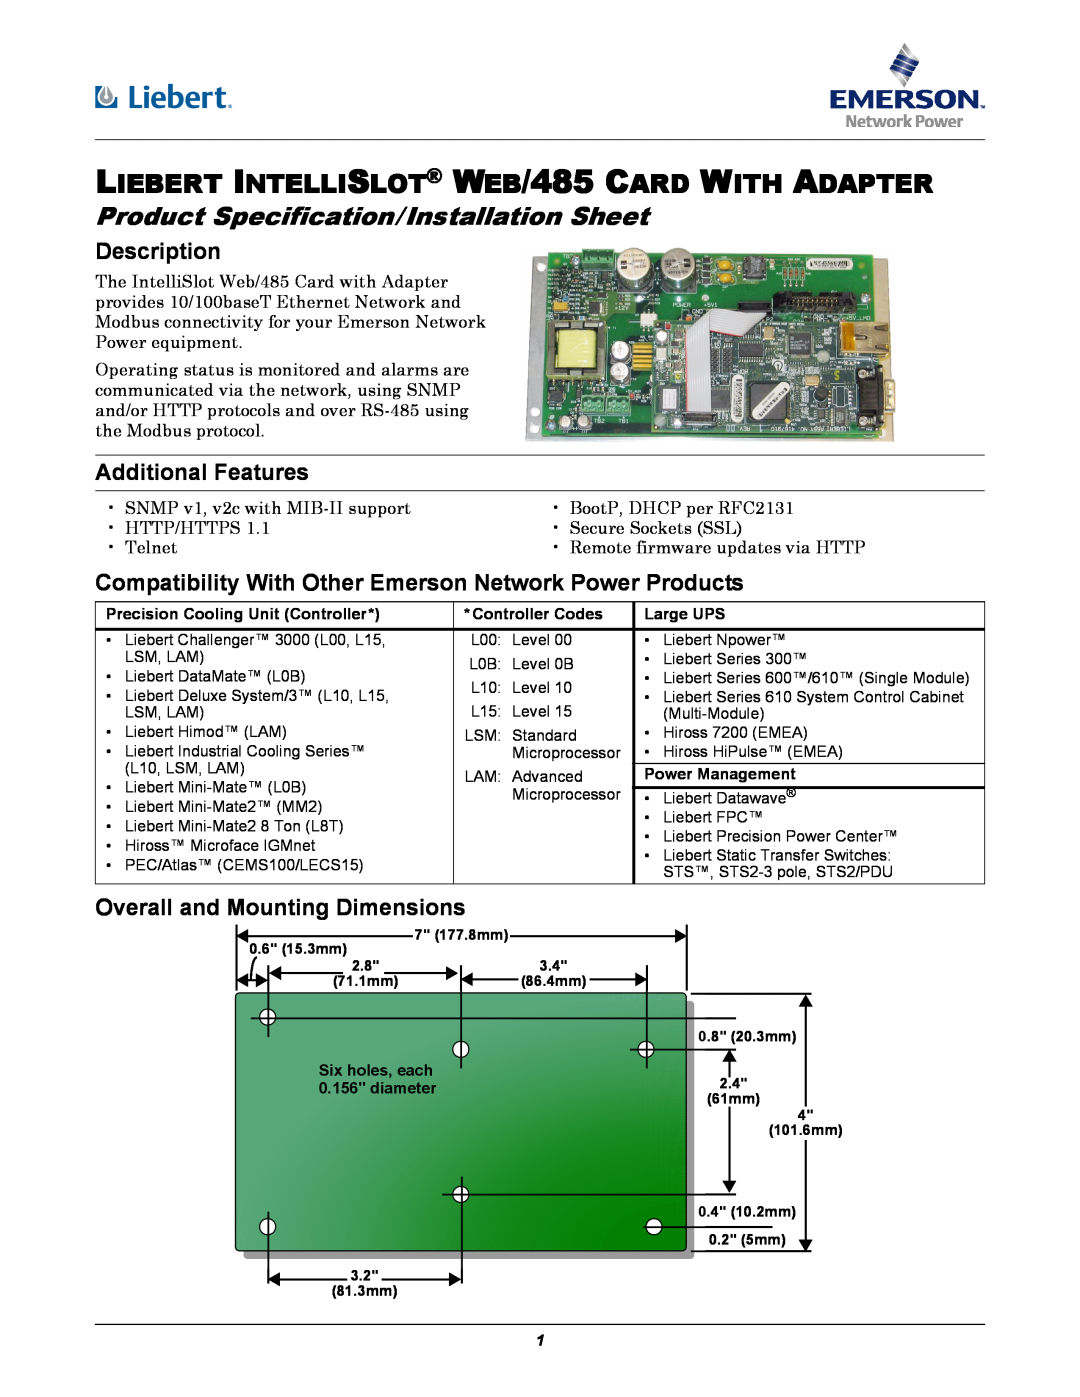 Emerson WEB/485 dimensions Description, Additional Features, Compatibility With Other Emerson Network Power Products 